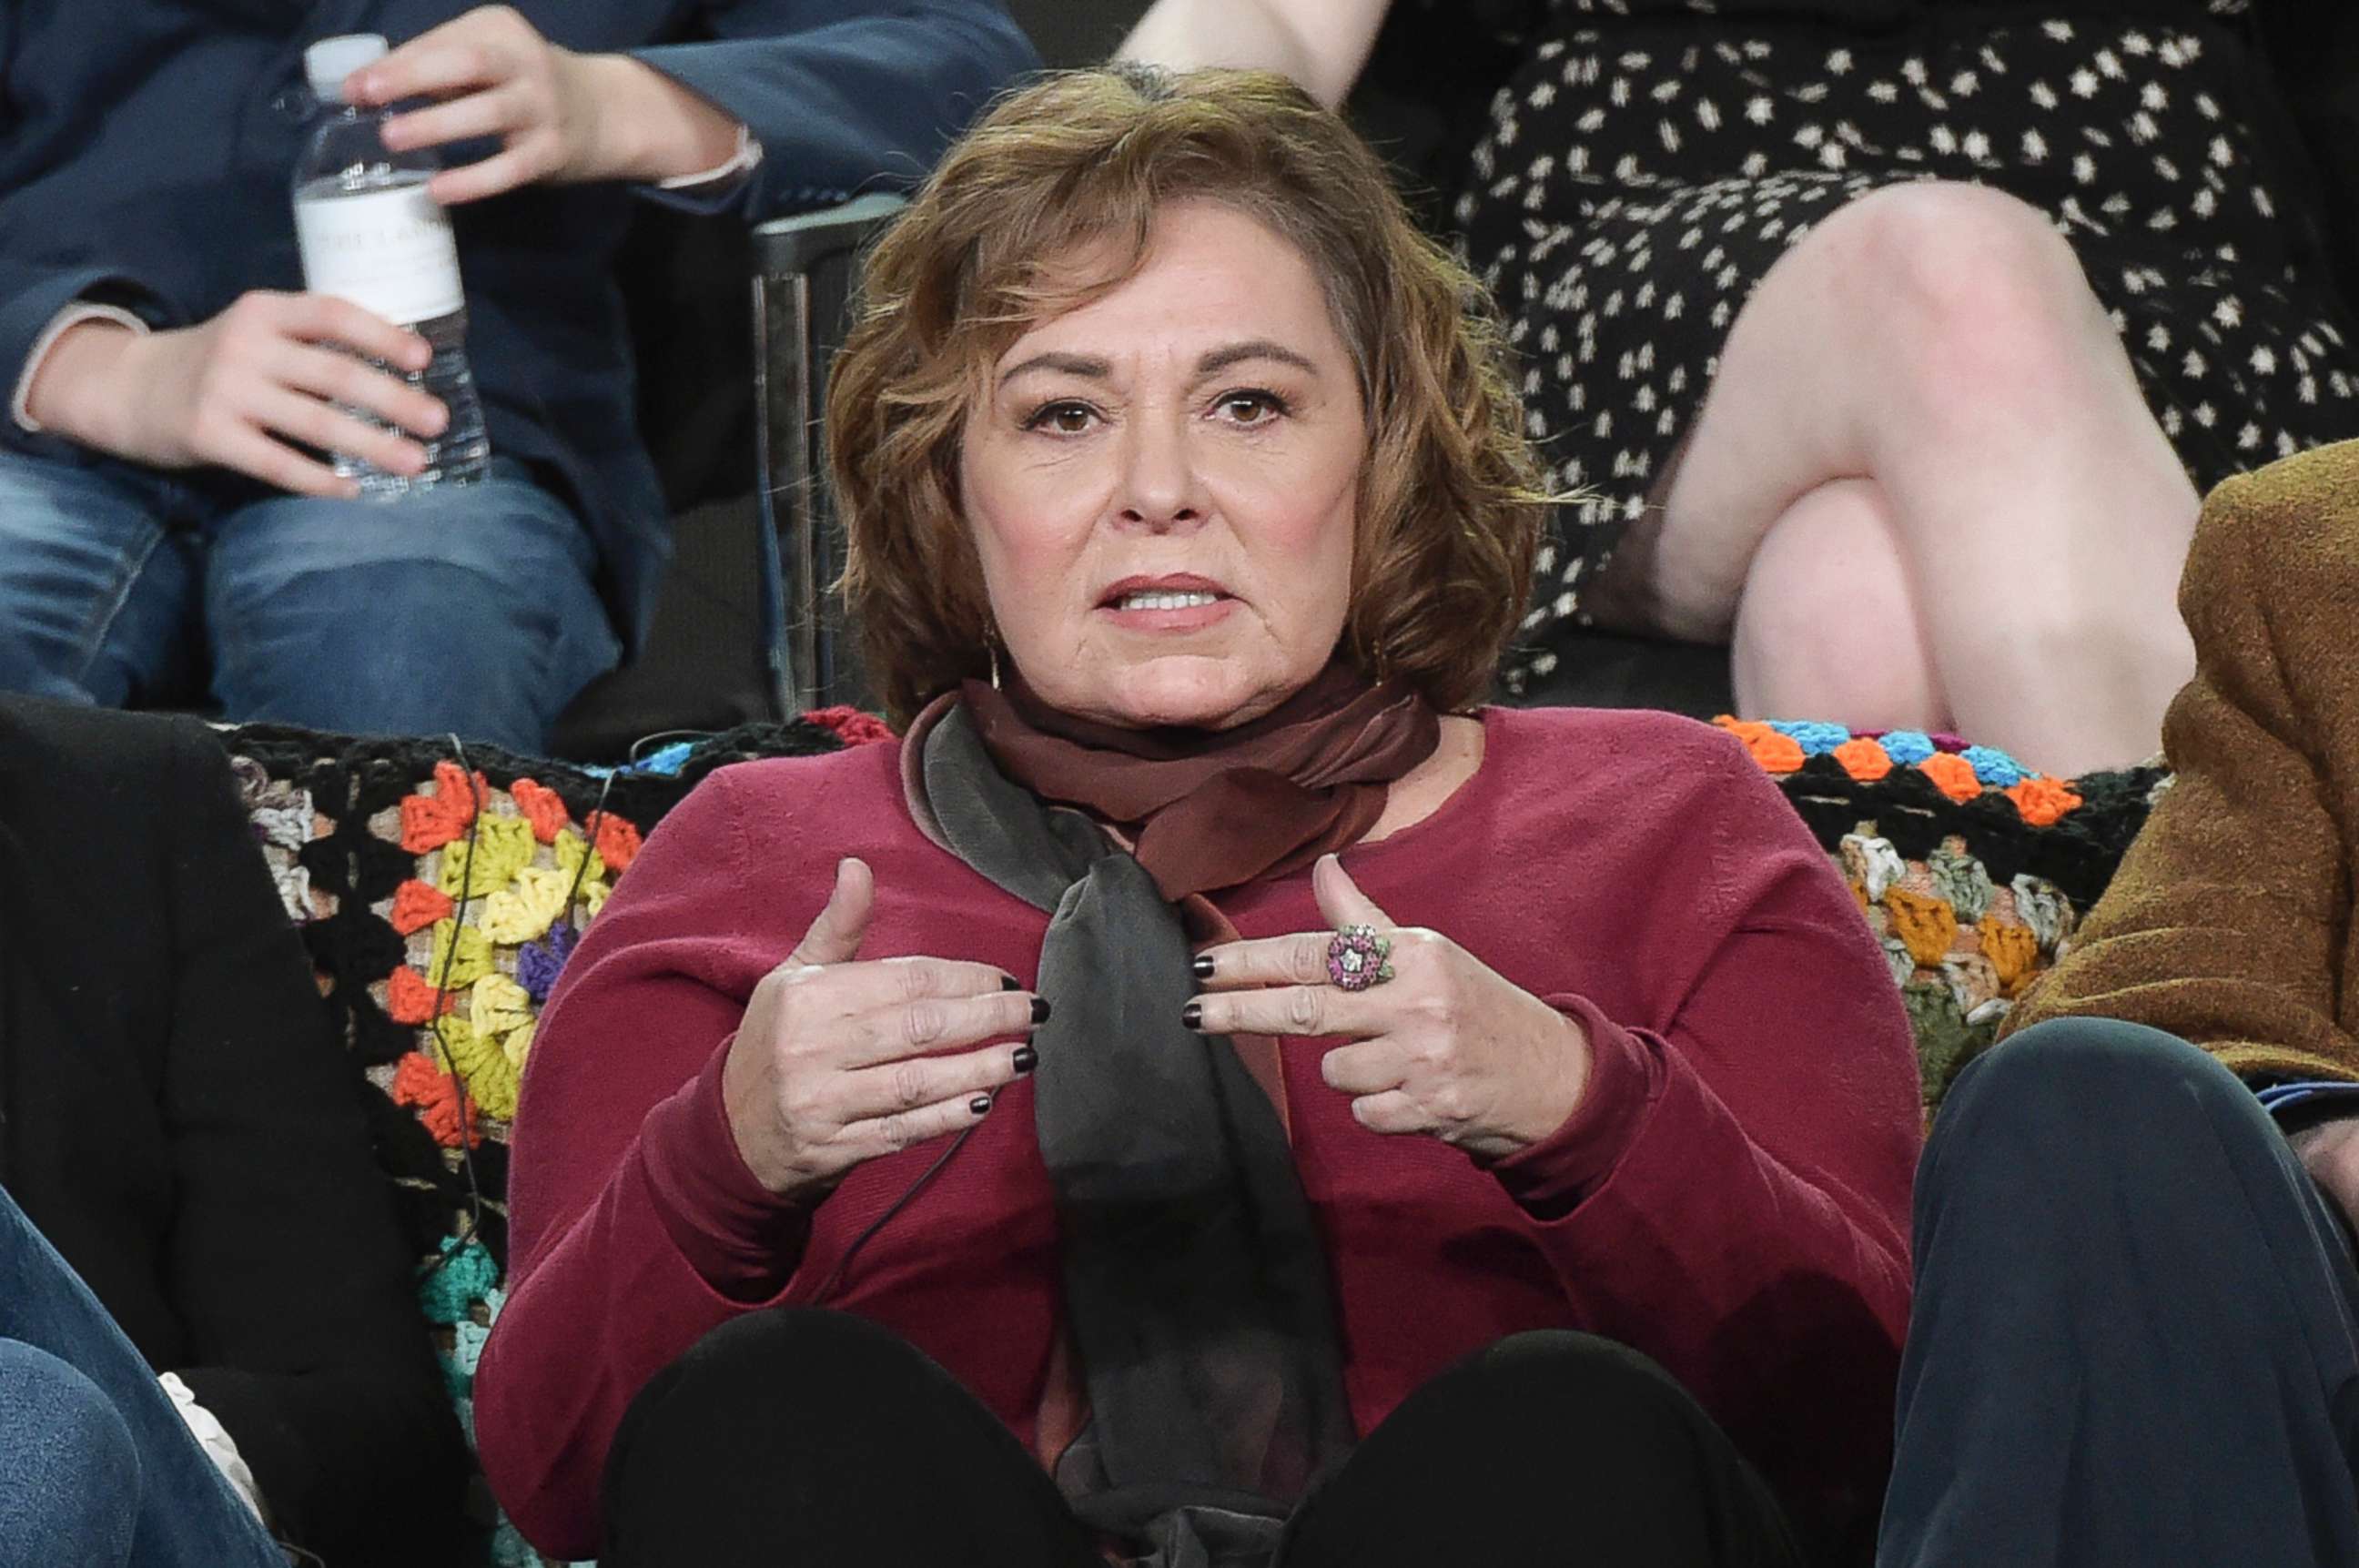 PHOTO: Roseanne Barr participates in the "Roseanne" panel during a press tour in Pasadena, Calif., Jan. 8, 2018.